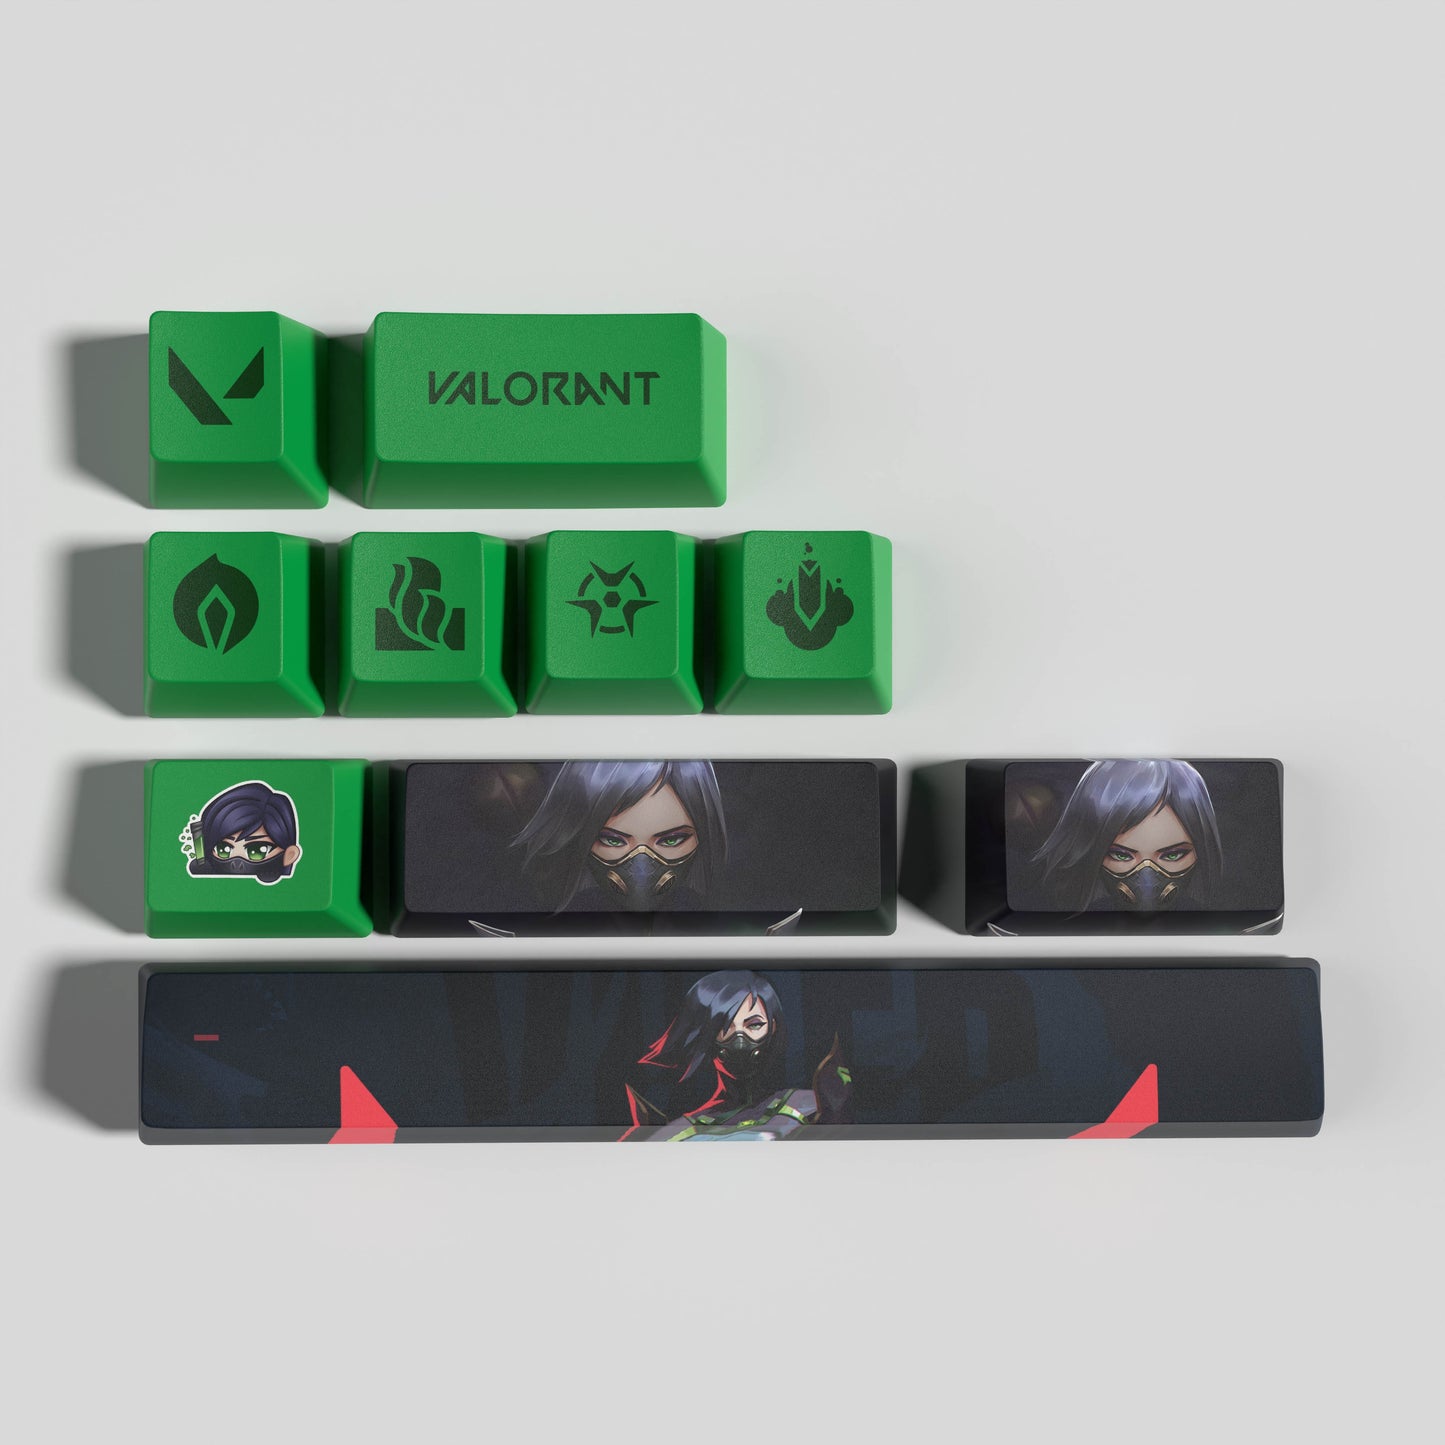 Valorant Custom Keycaps For All Agents -  Best Gift for Valorant Player - Gamer Keycaps